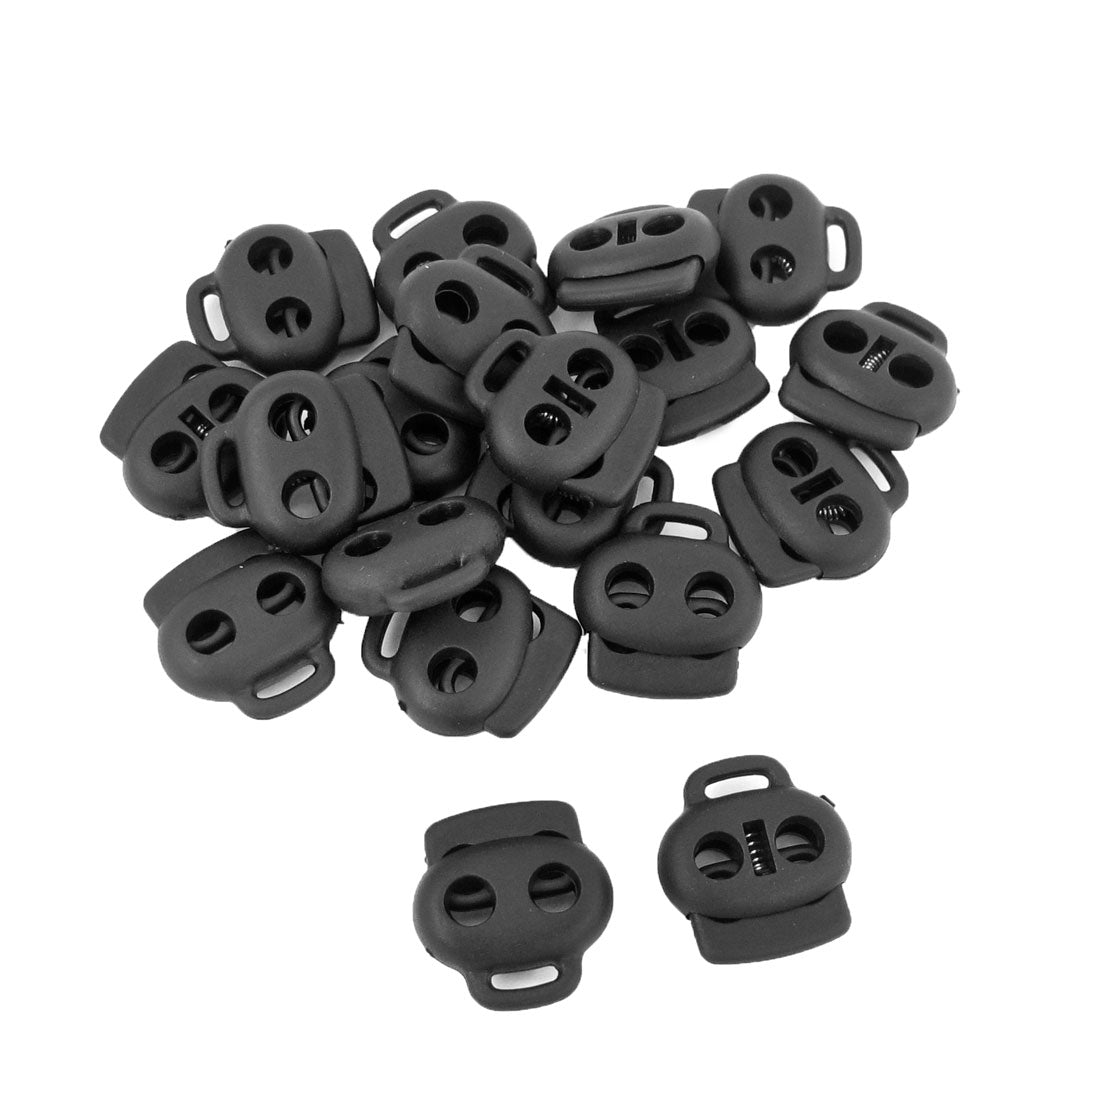 uxcell Uxcell Black Plastic 5.6mm Dia Dual Holes Backpack Lanyard Cord Locks Ends 20 Pcs